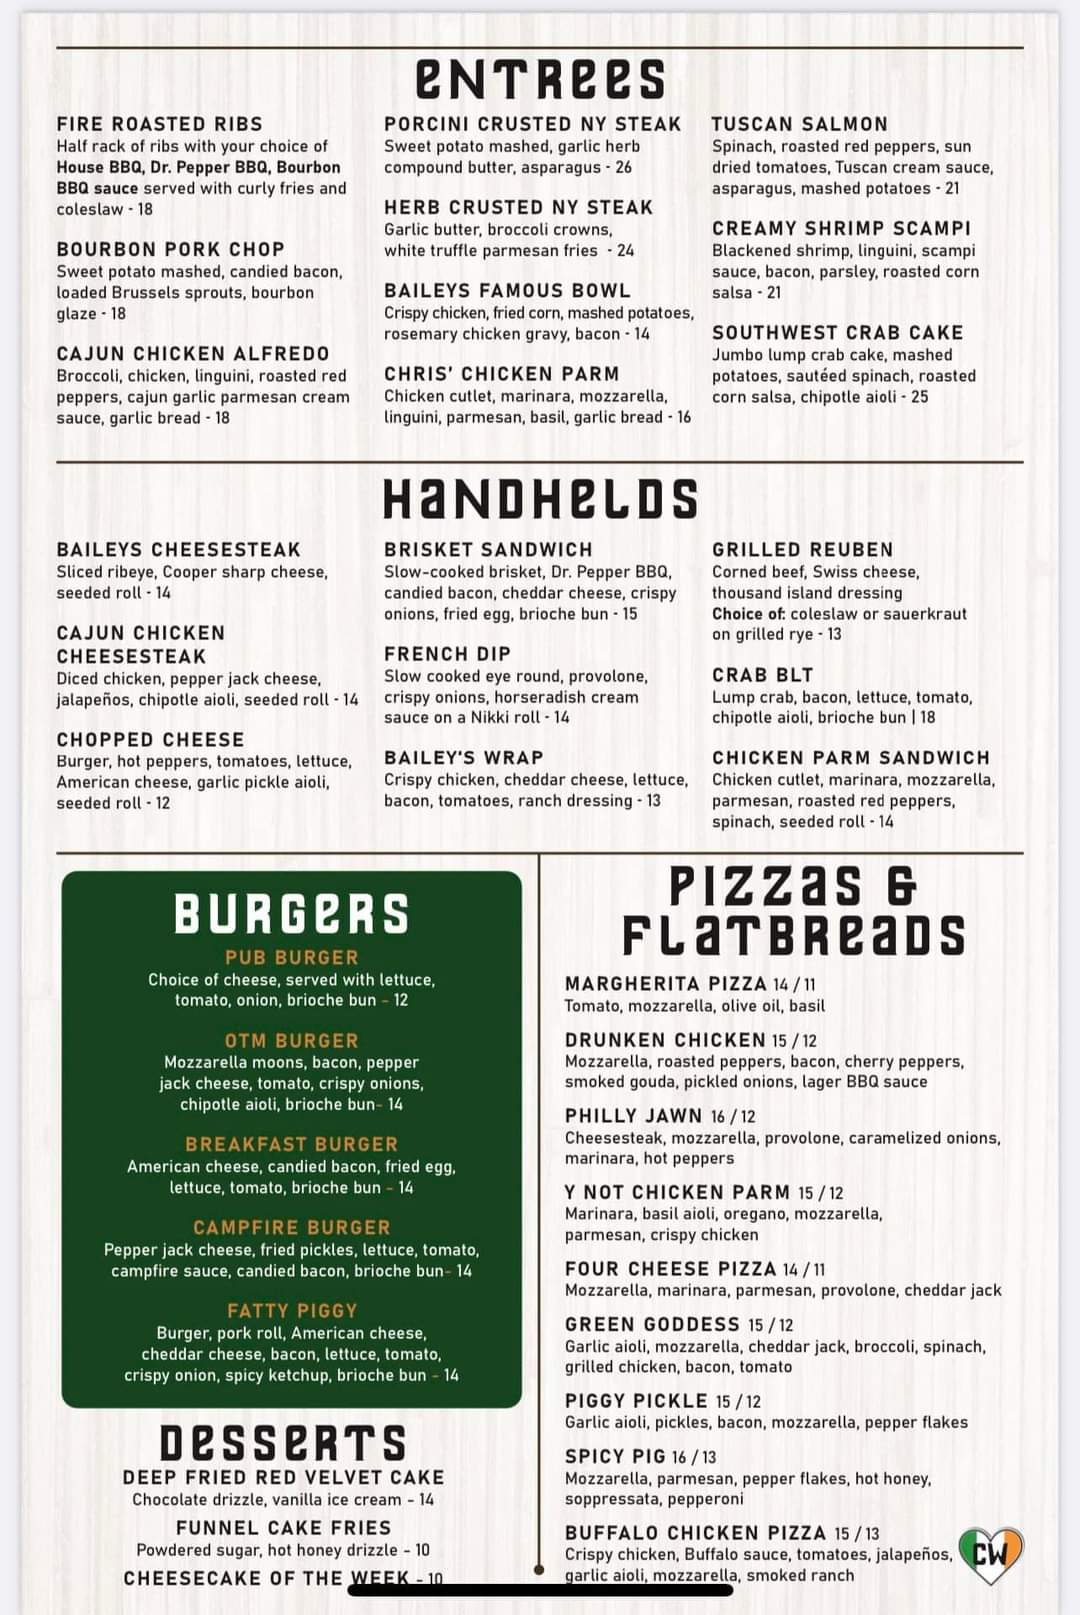 A menu for a restaurant with a green background.